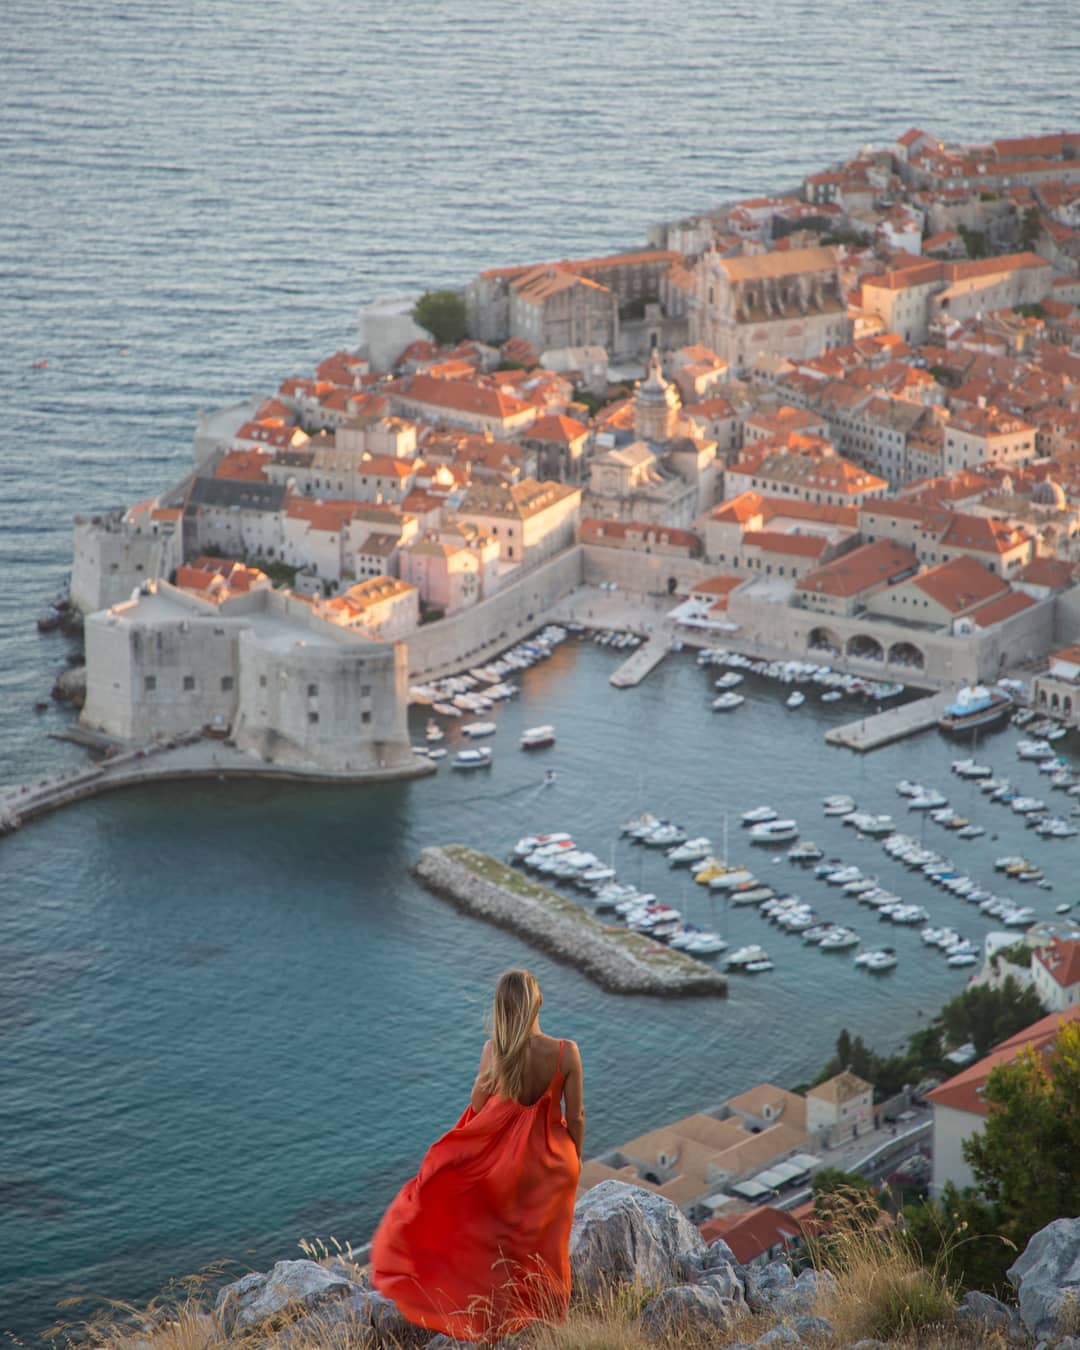 Yacht charter in Dubrovnik